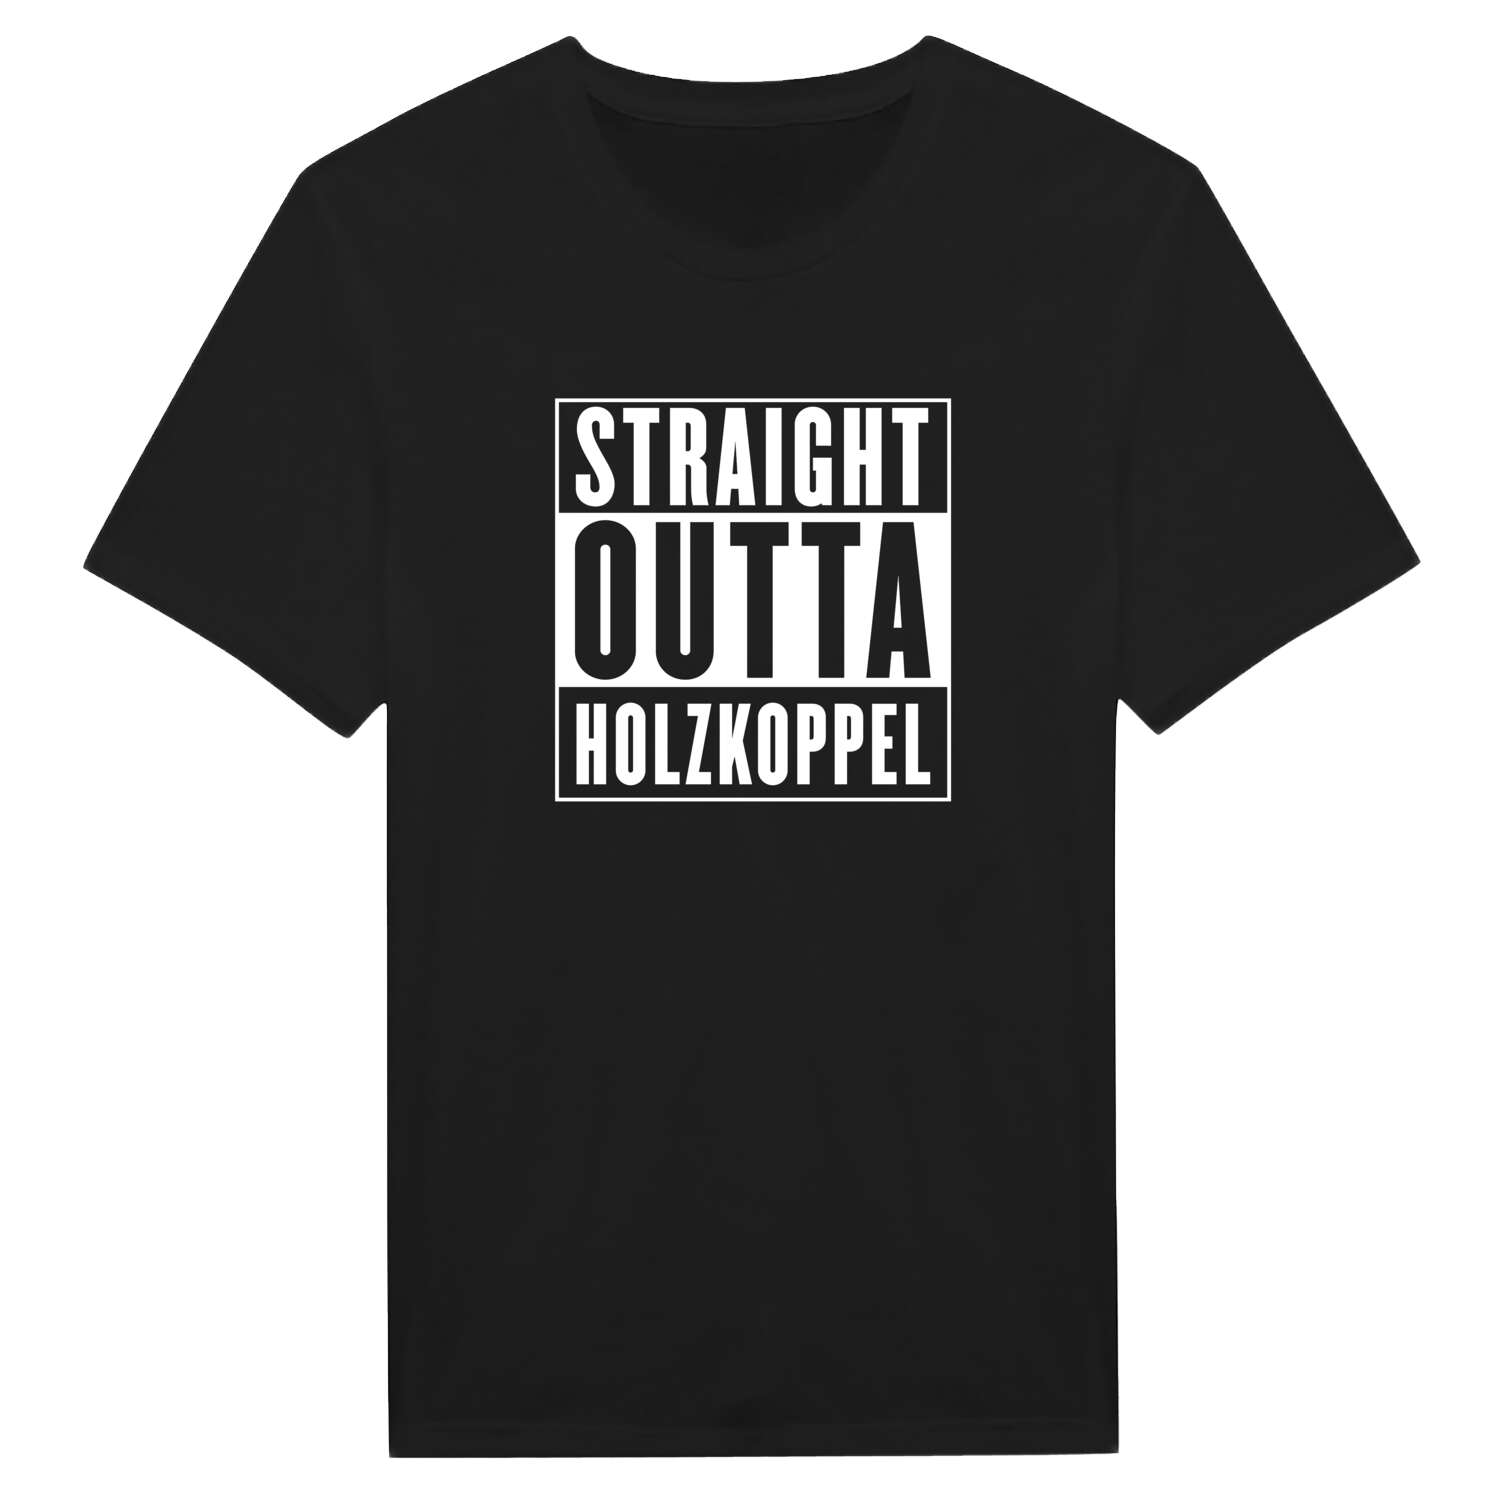 Holzkoppel T-Shirt »Straight Outta«